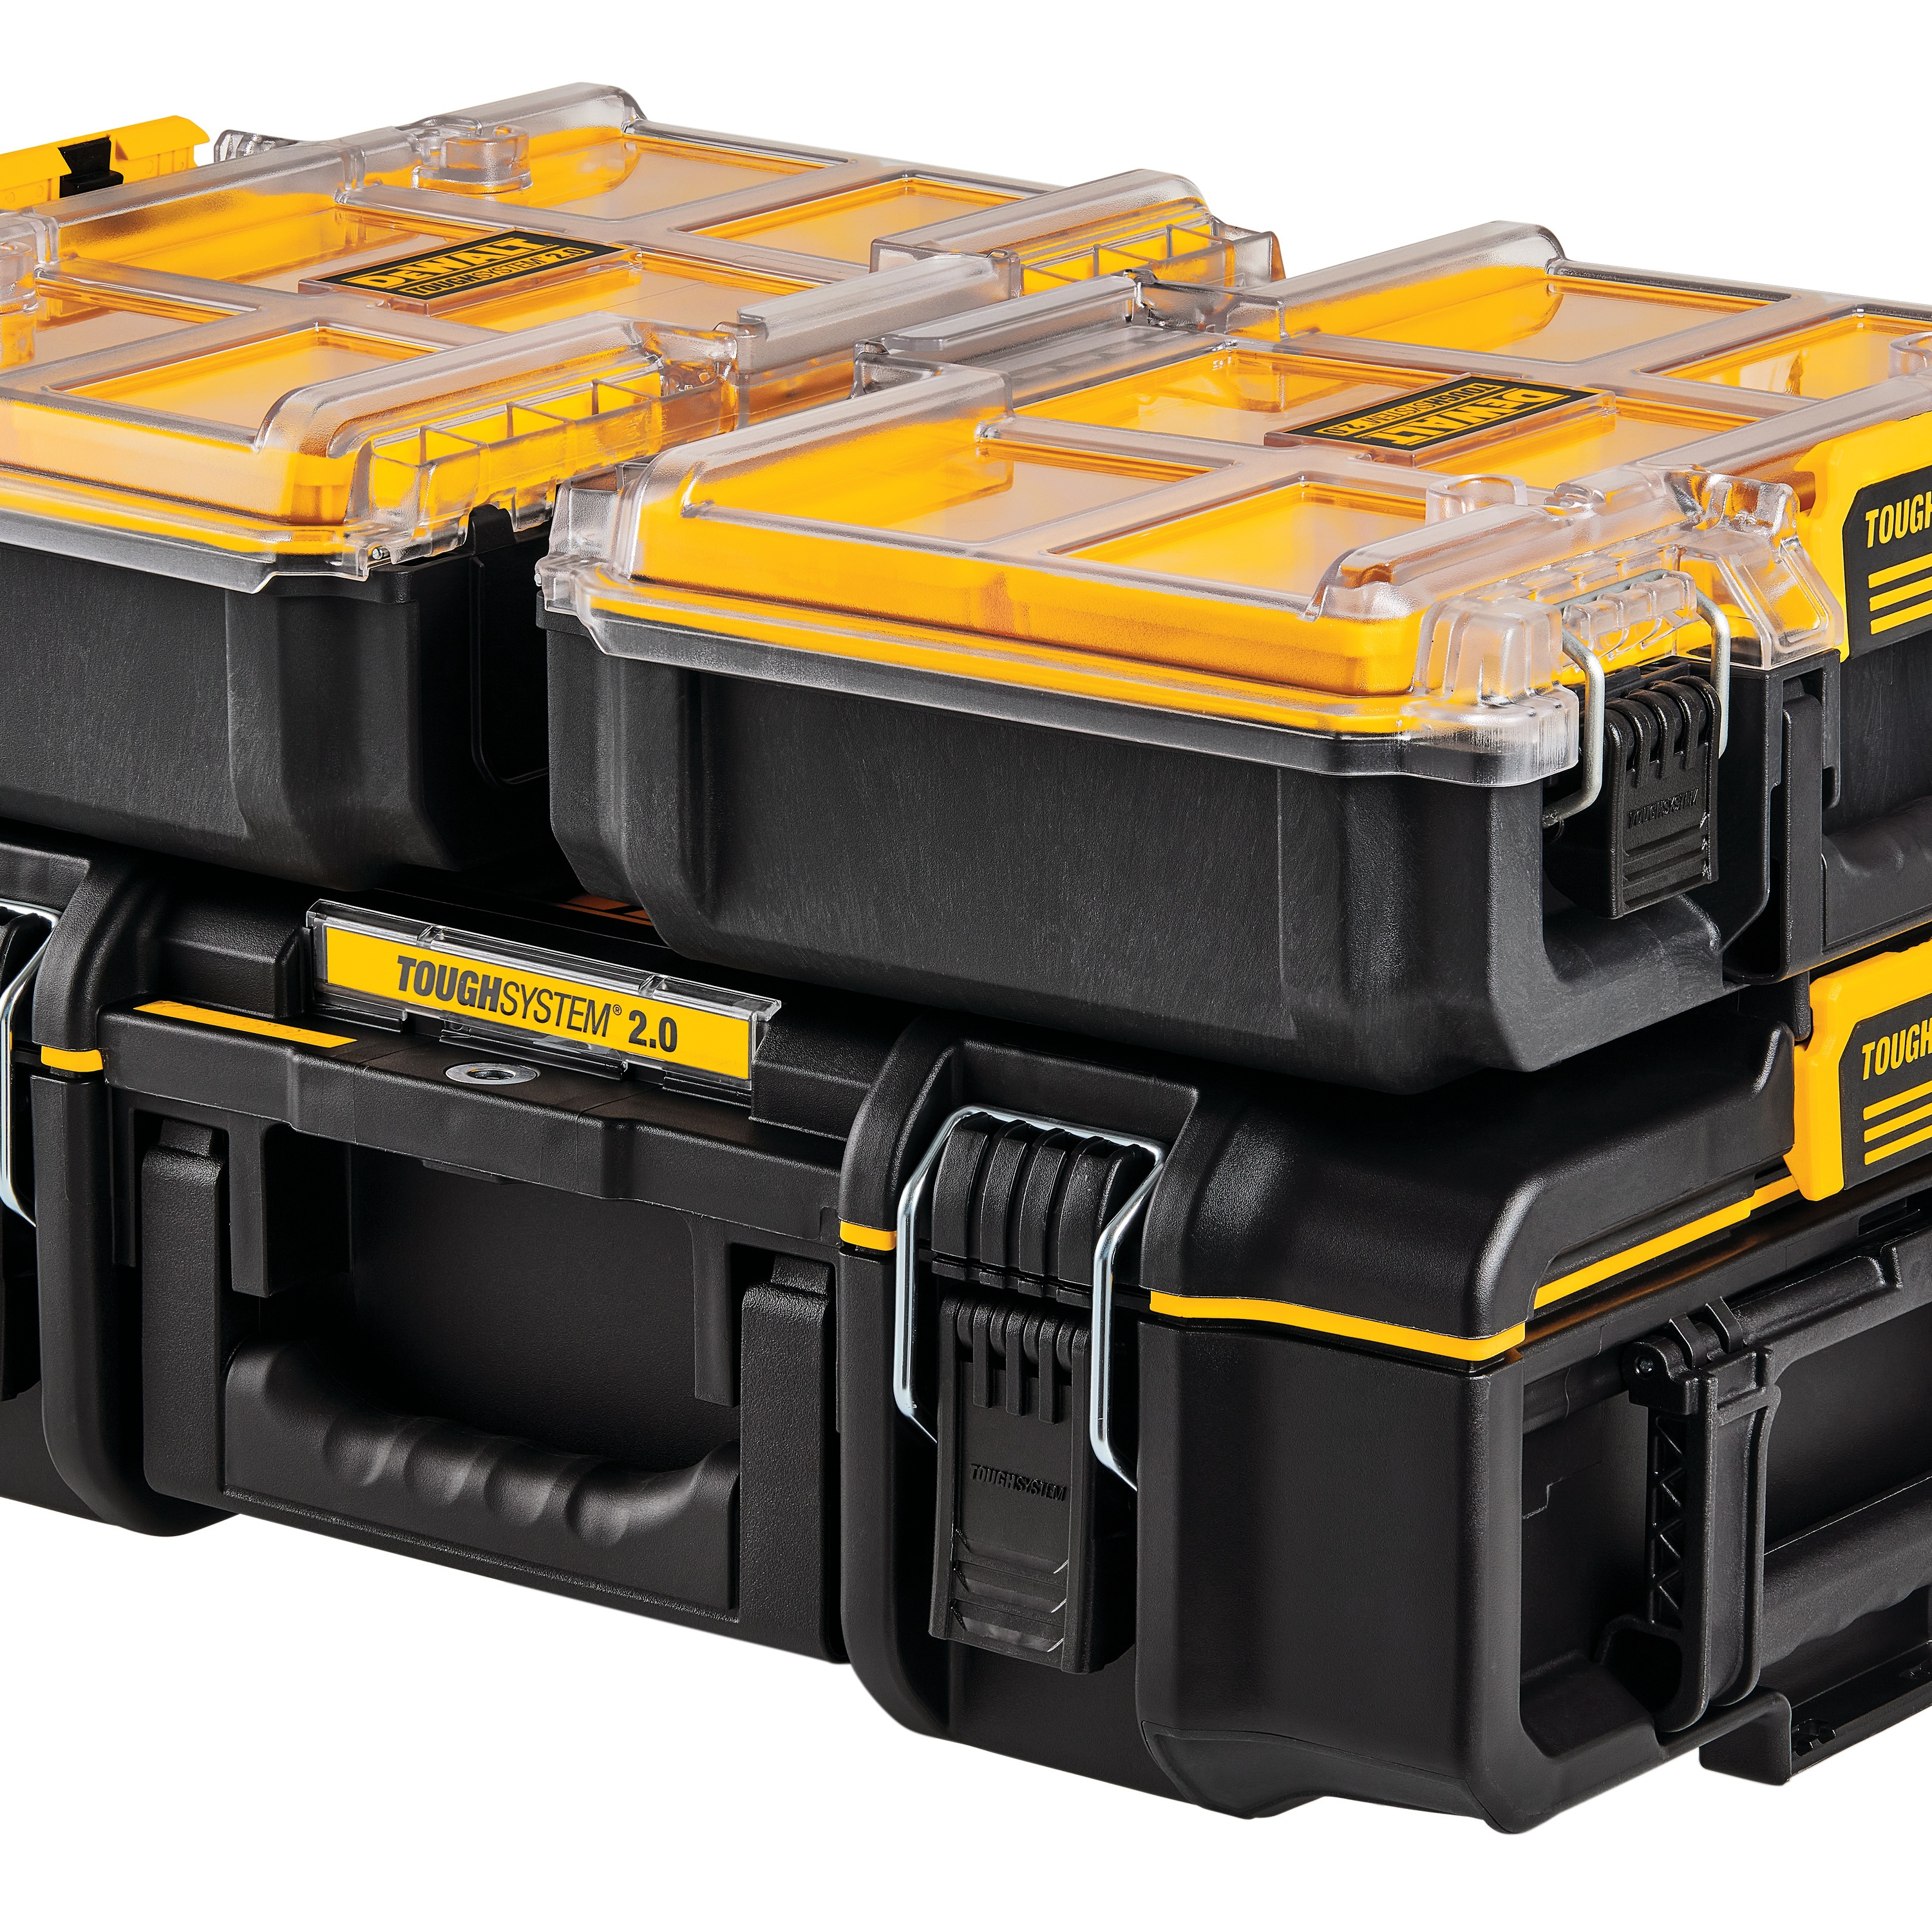 Two tough system 2.0 deep compact organizers stacked on top of a larger case.